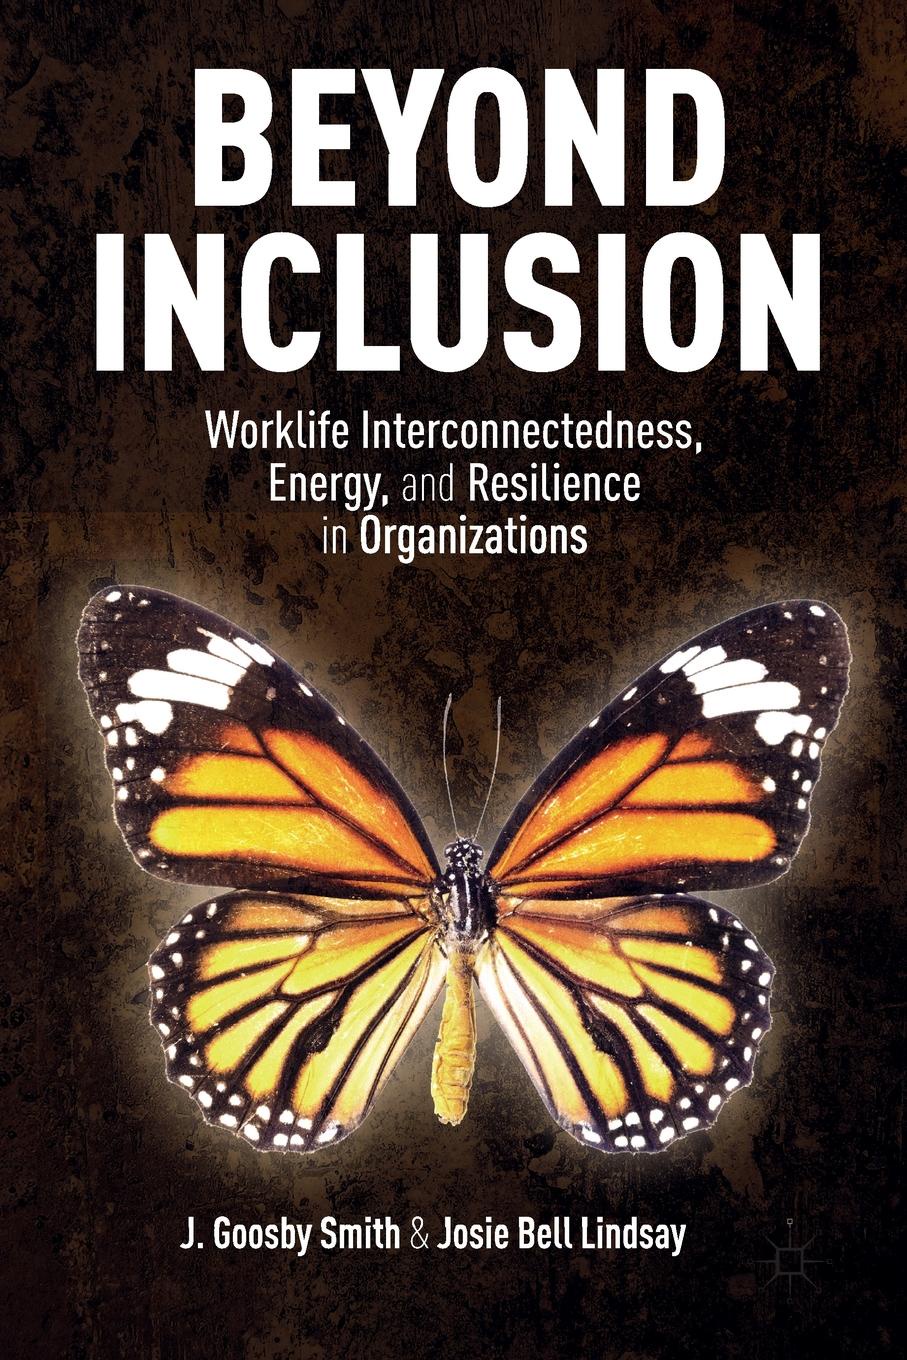 Beyond Inclusion. Worklife Interconnectedness, Energy, and Resilience in Organizations